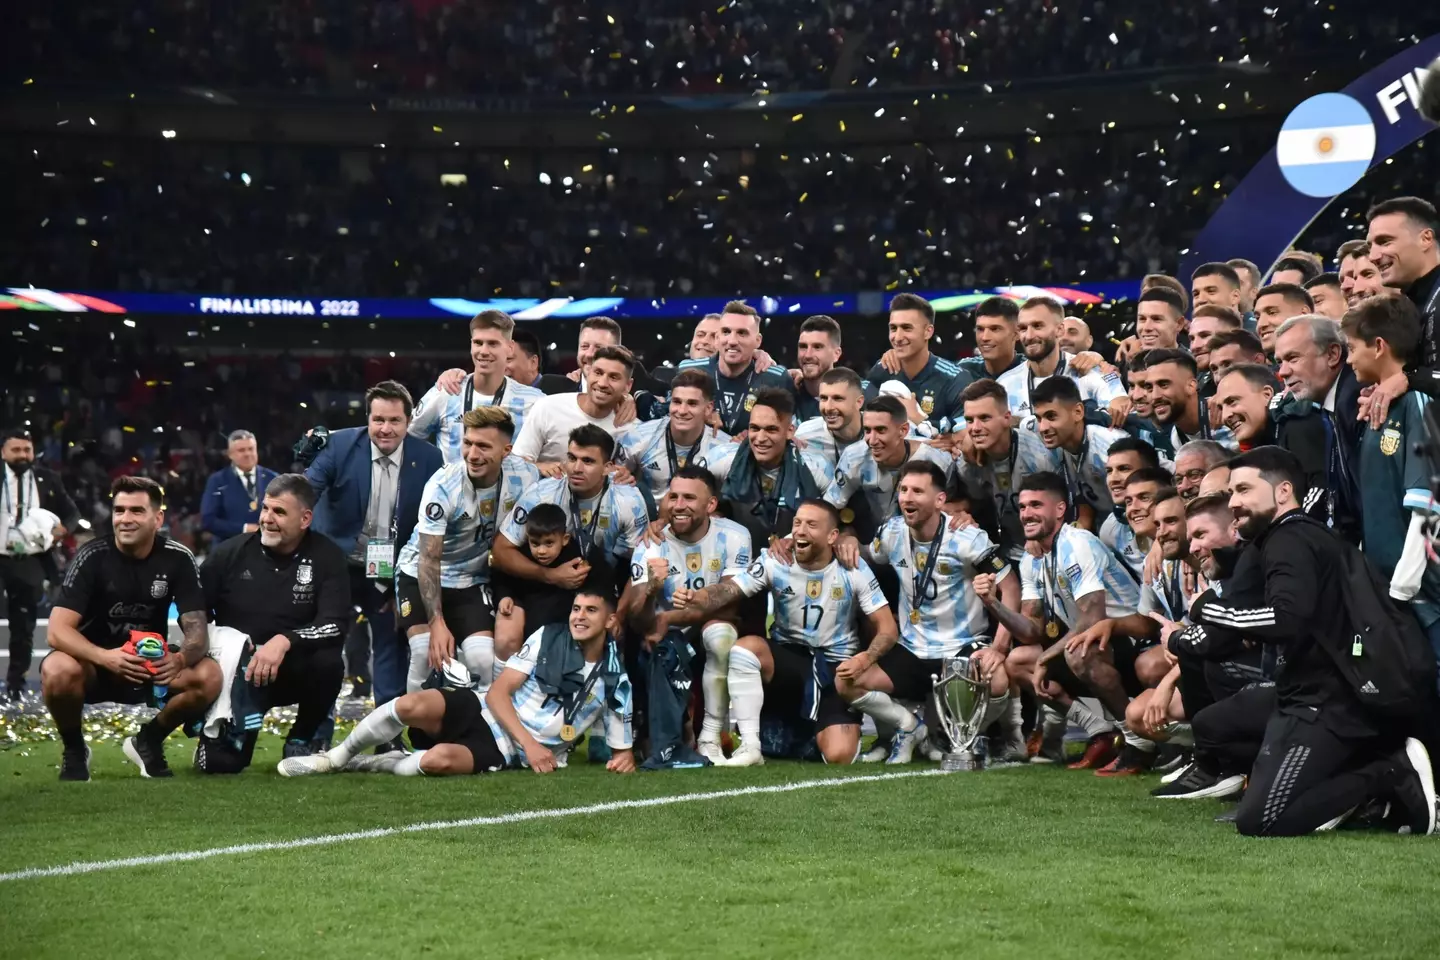 Argentina player celebrating their Finalissima victory over Italy in June. (Image